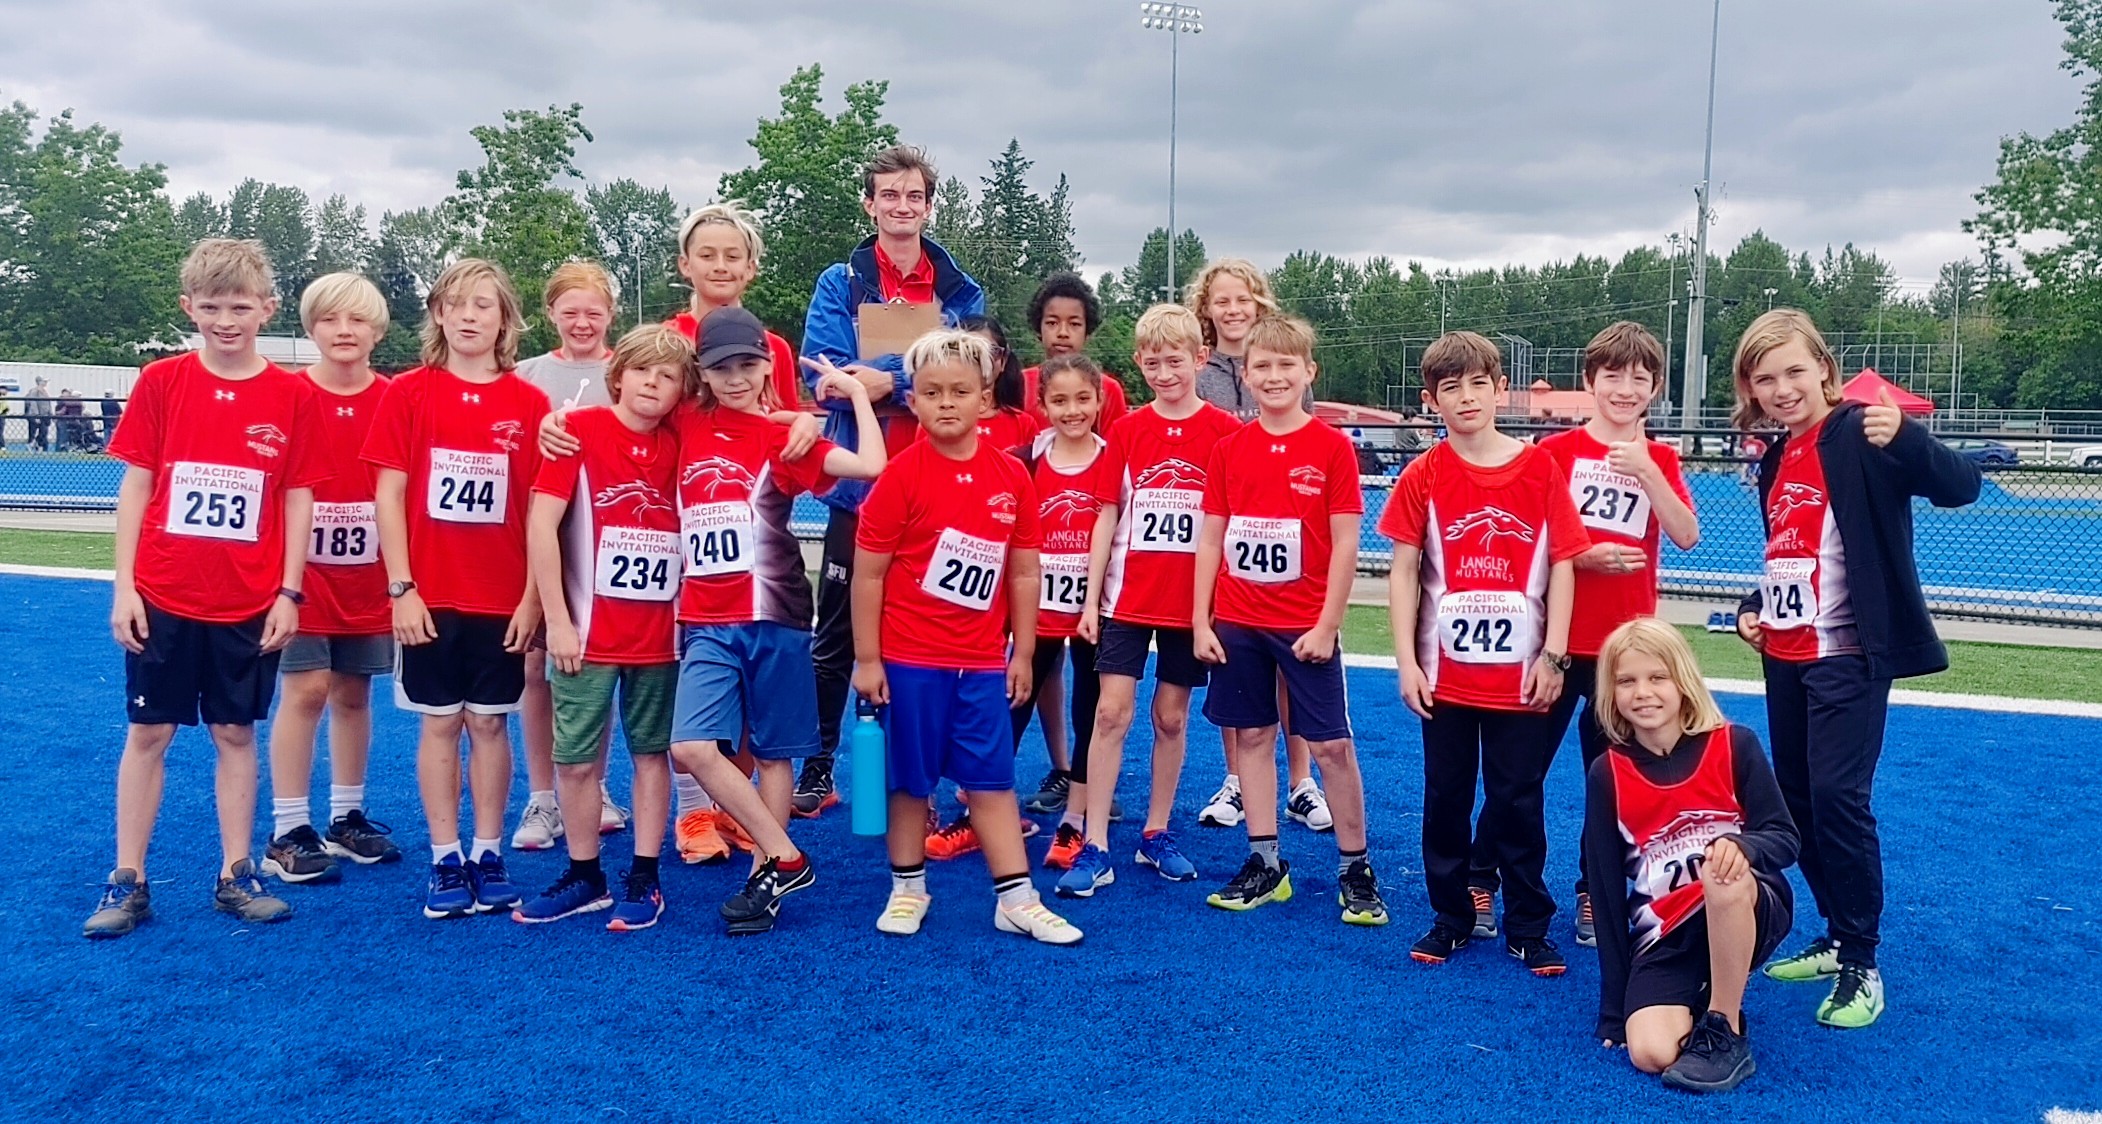 Langley Mustangs Track and Field Club, Langley, BC, Canada